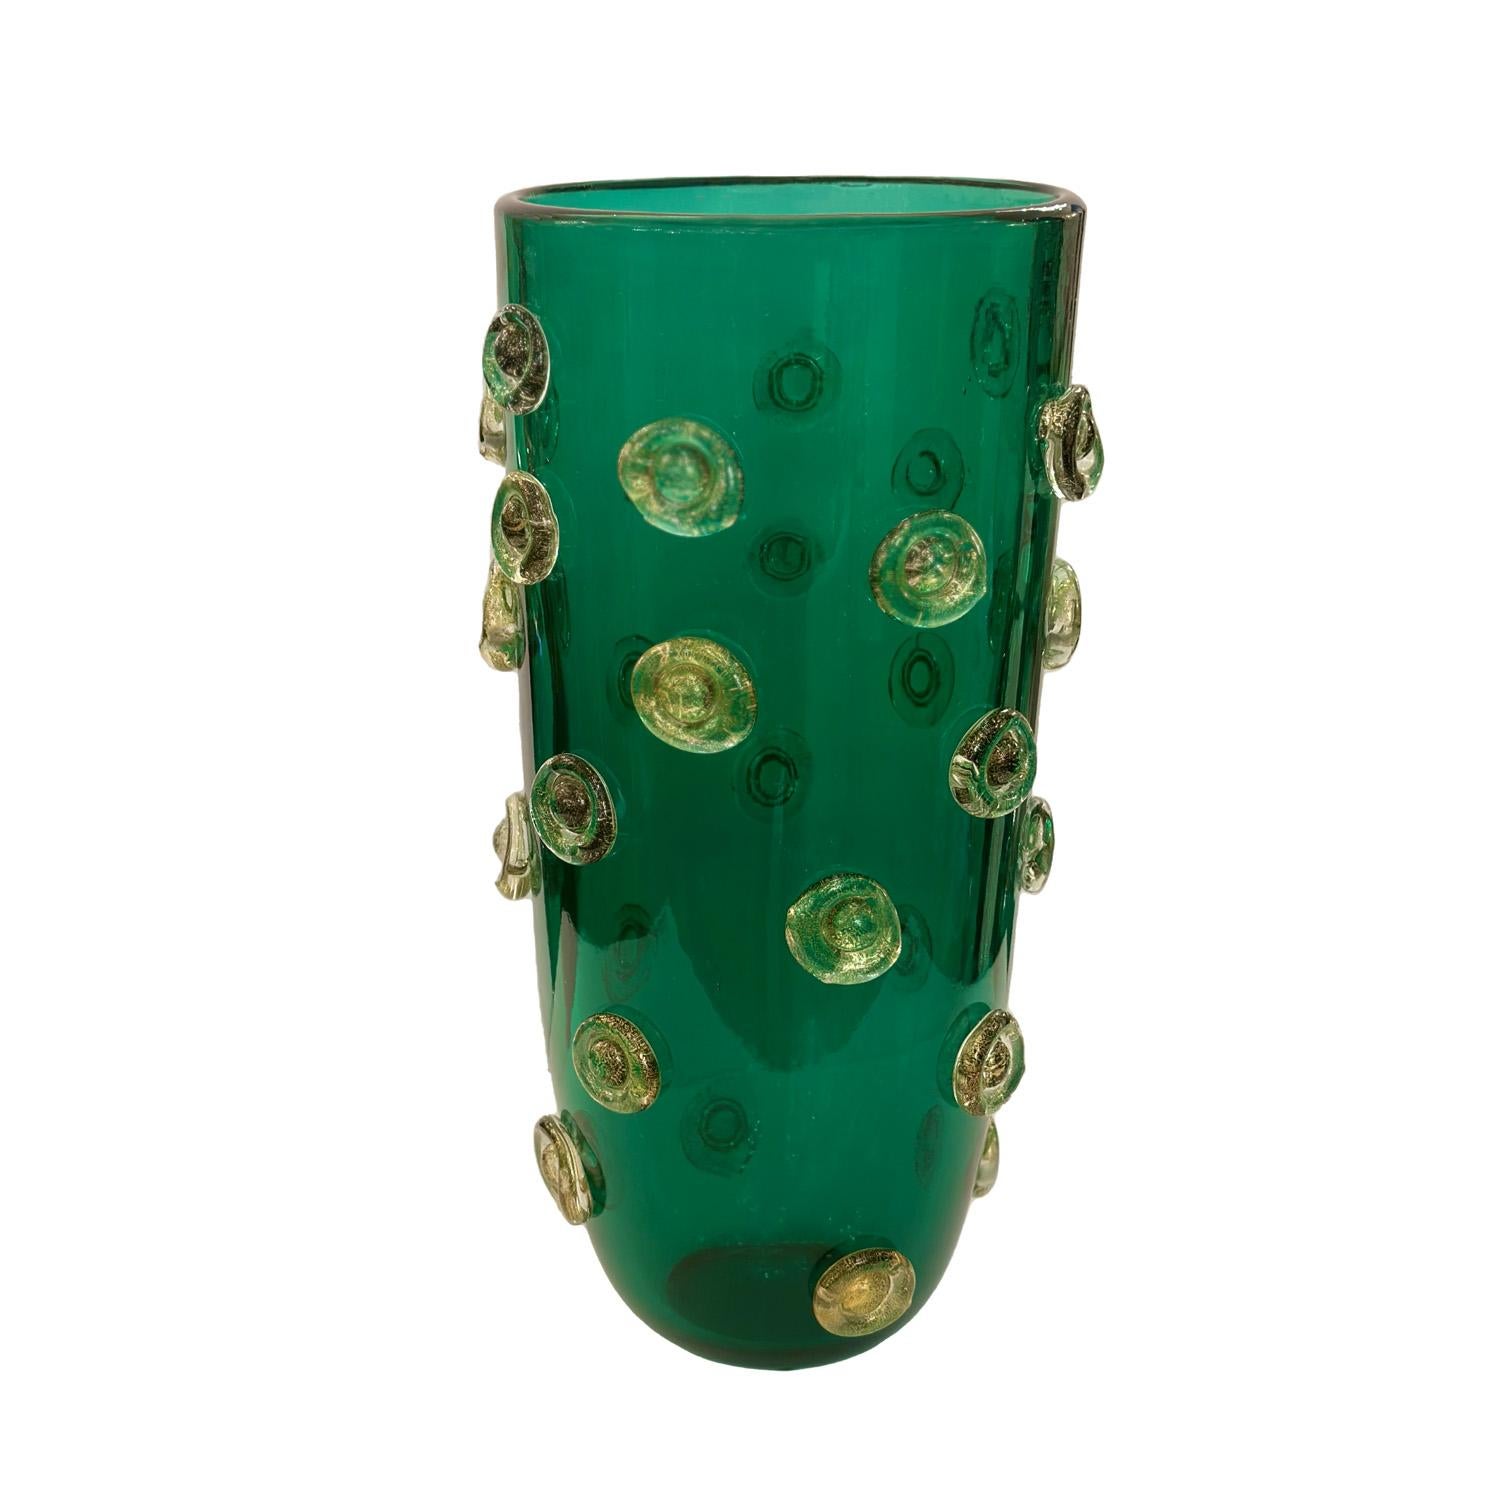 Richly colored Emerald green Murano glass vase decorated with applied dot design in clear glass with gold leaf inclusions. Italy, 2023

This vase is currently available in our NYC showroom. 